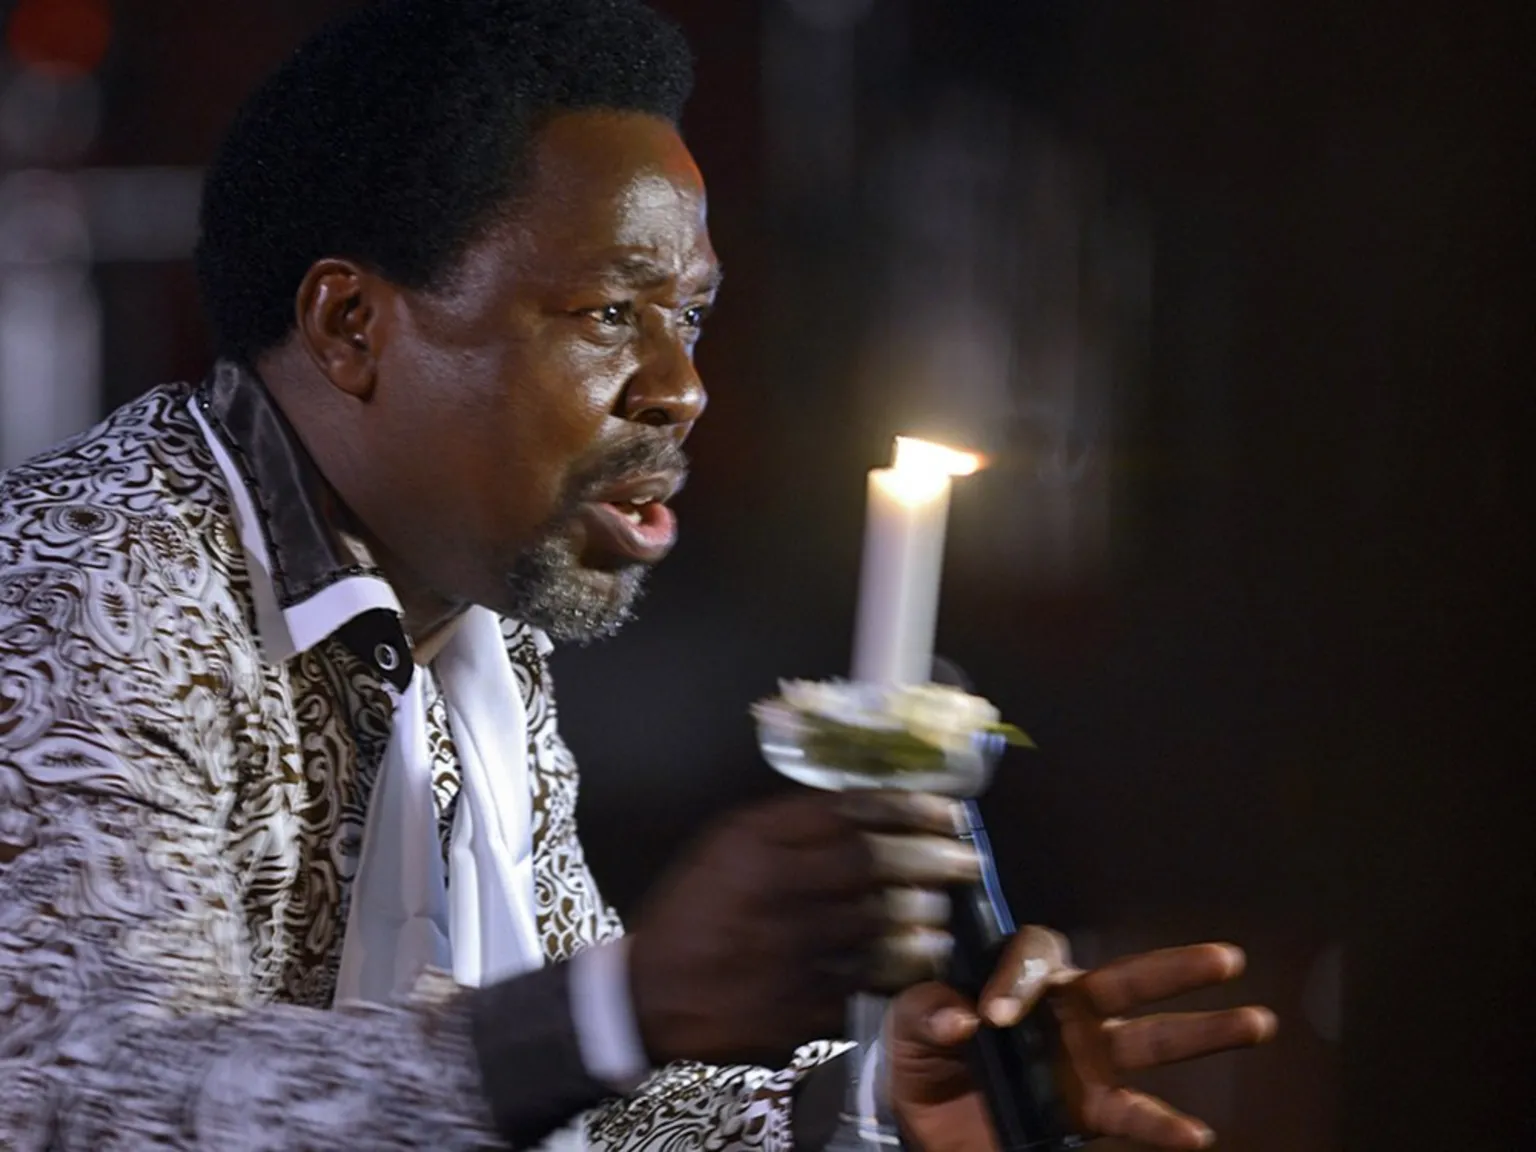 TB Joshua: Megachurch leader raped and tortured worshippers, BBC finds (bbc.com)